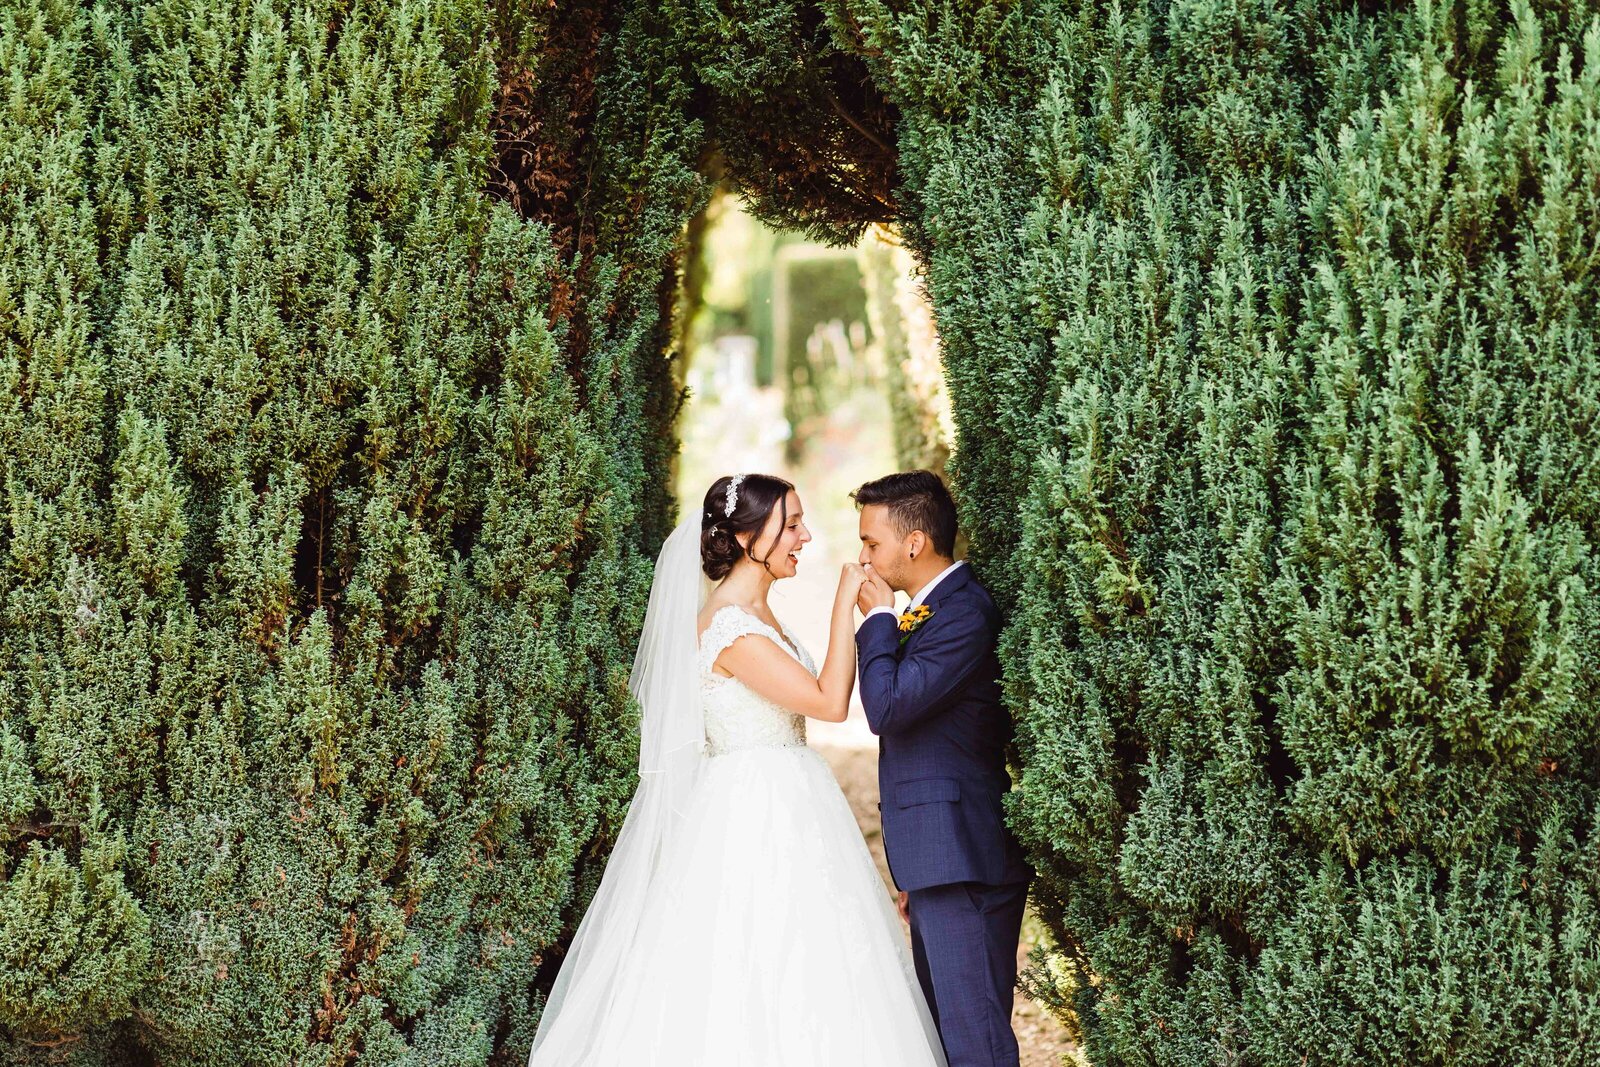 Bride and Groom portrait at their English Garden Wedding in Dorset, kissing under a hedge archway.